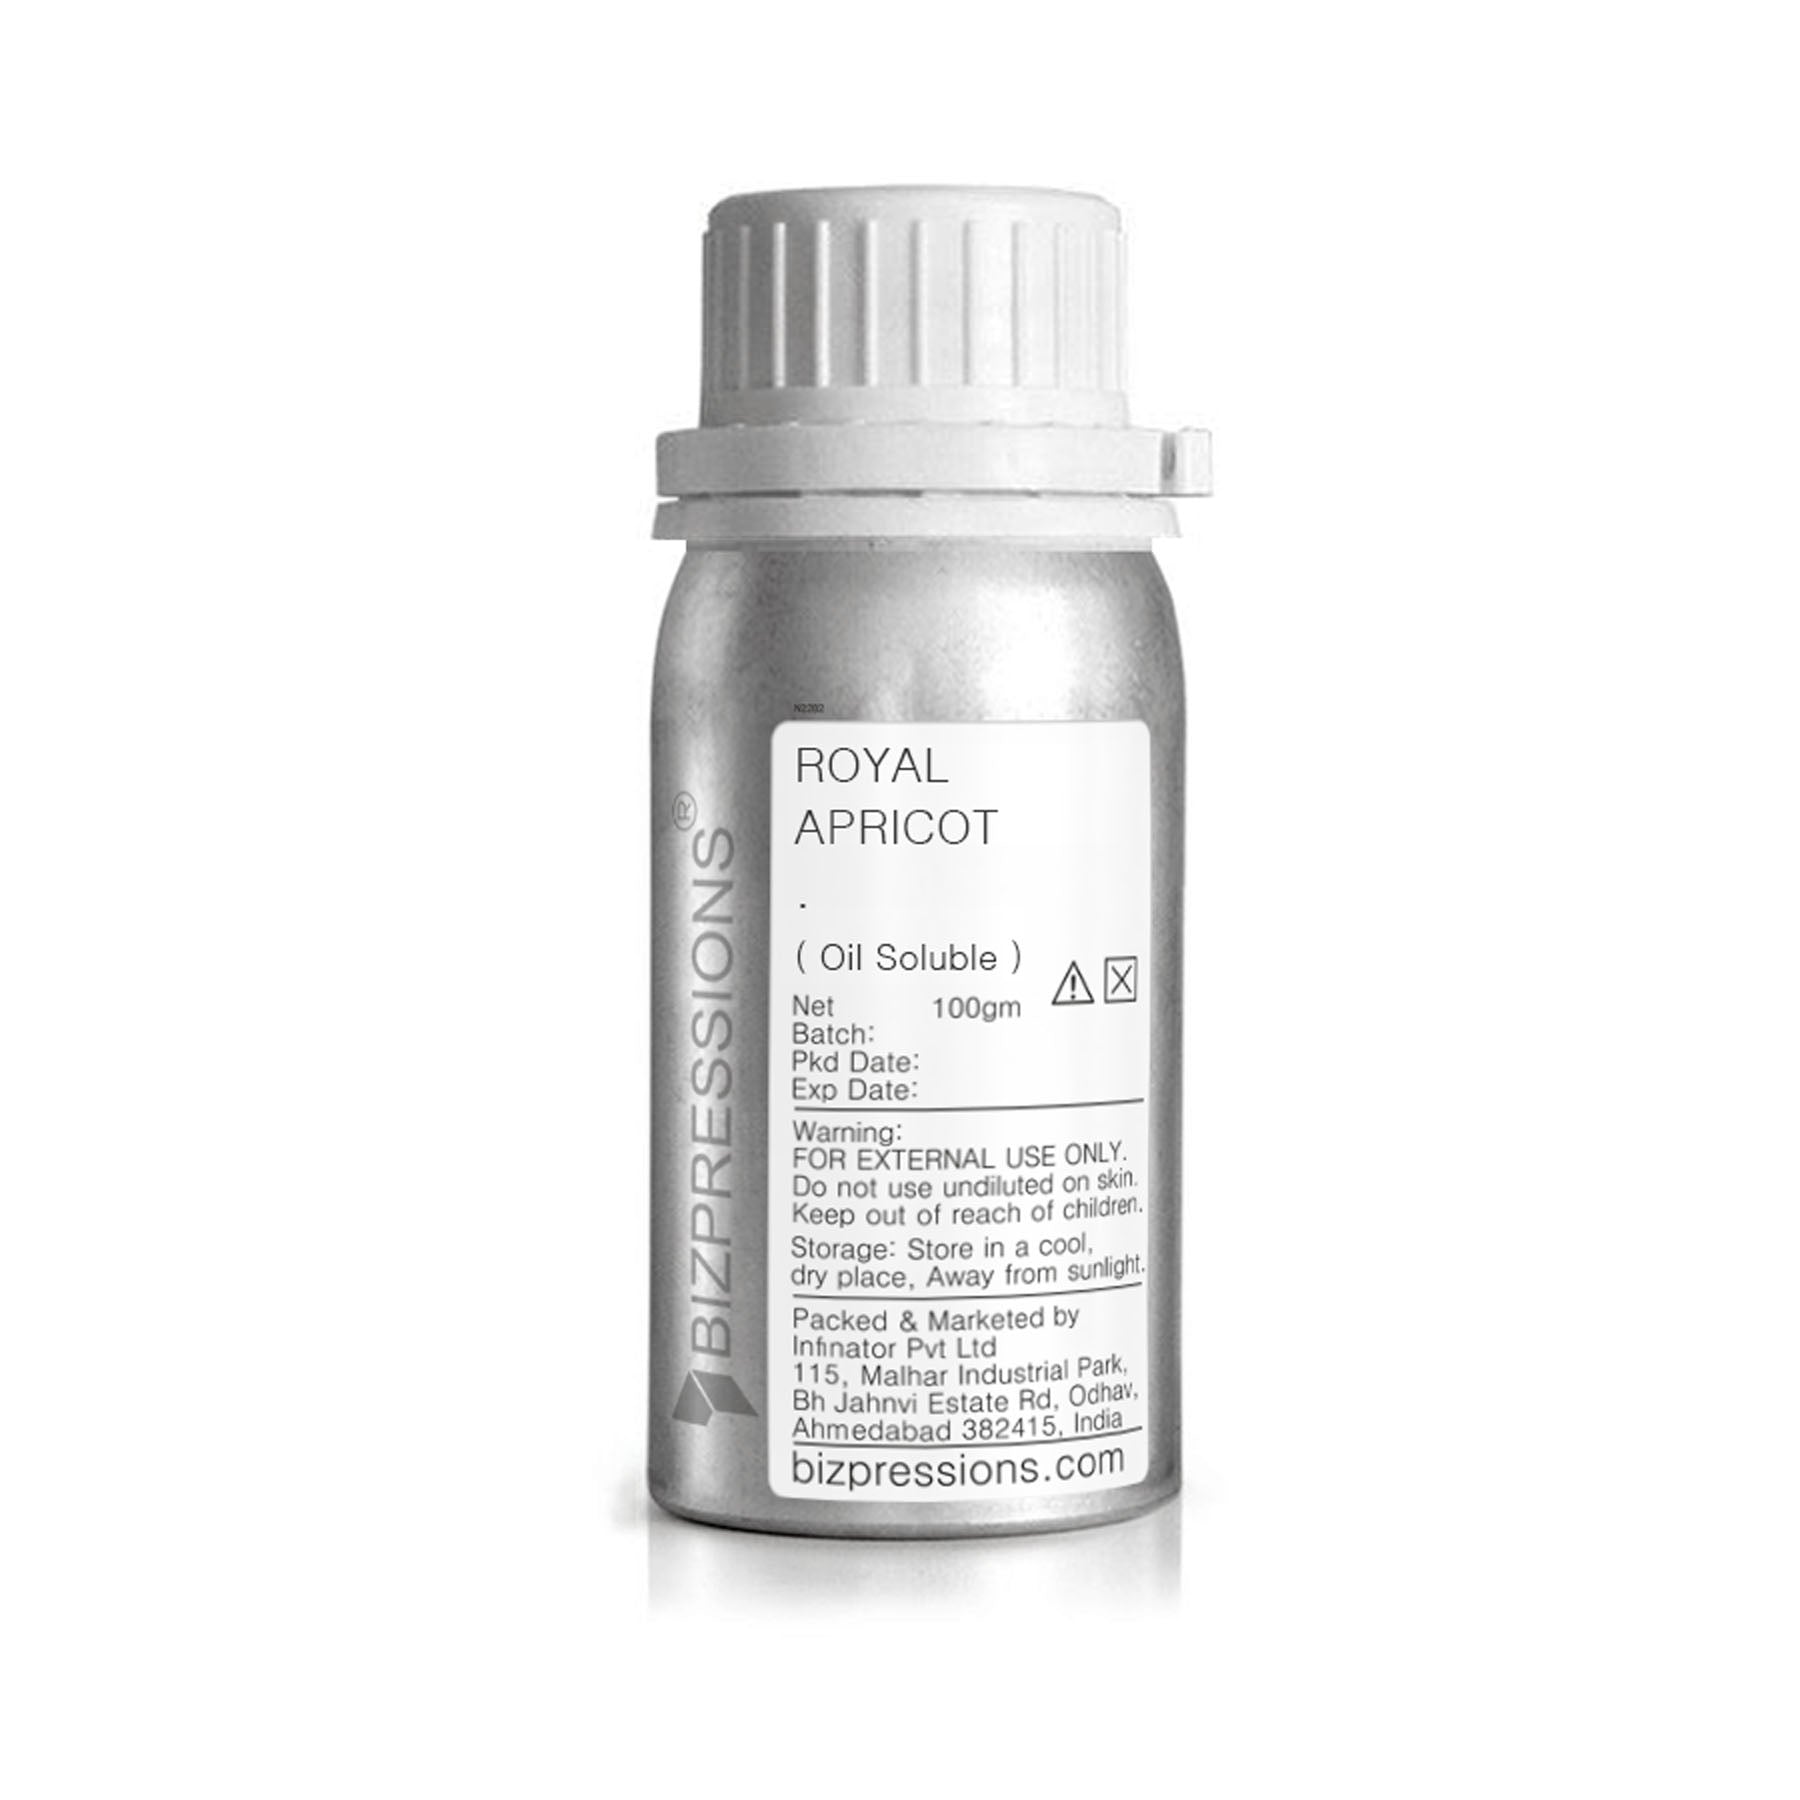 ROYAL APRICOT - Fragrance ( Oil Soluble ) - 100 gm